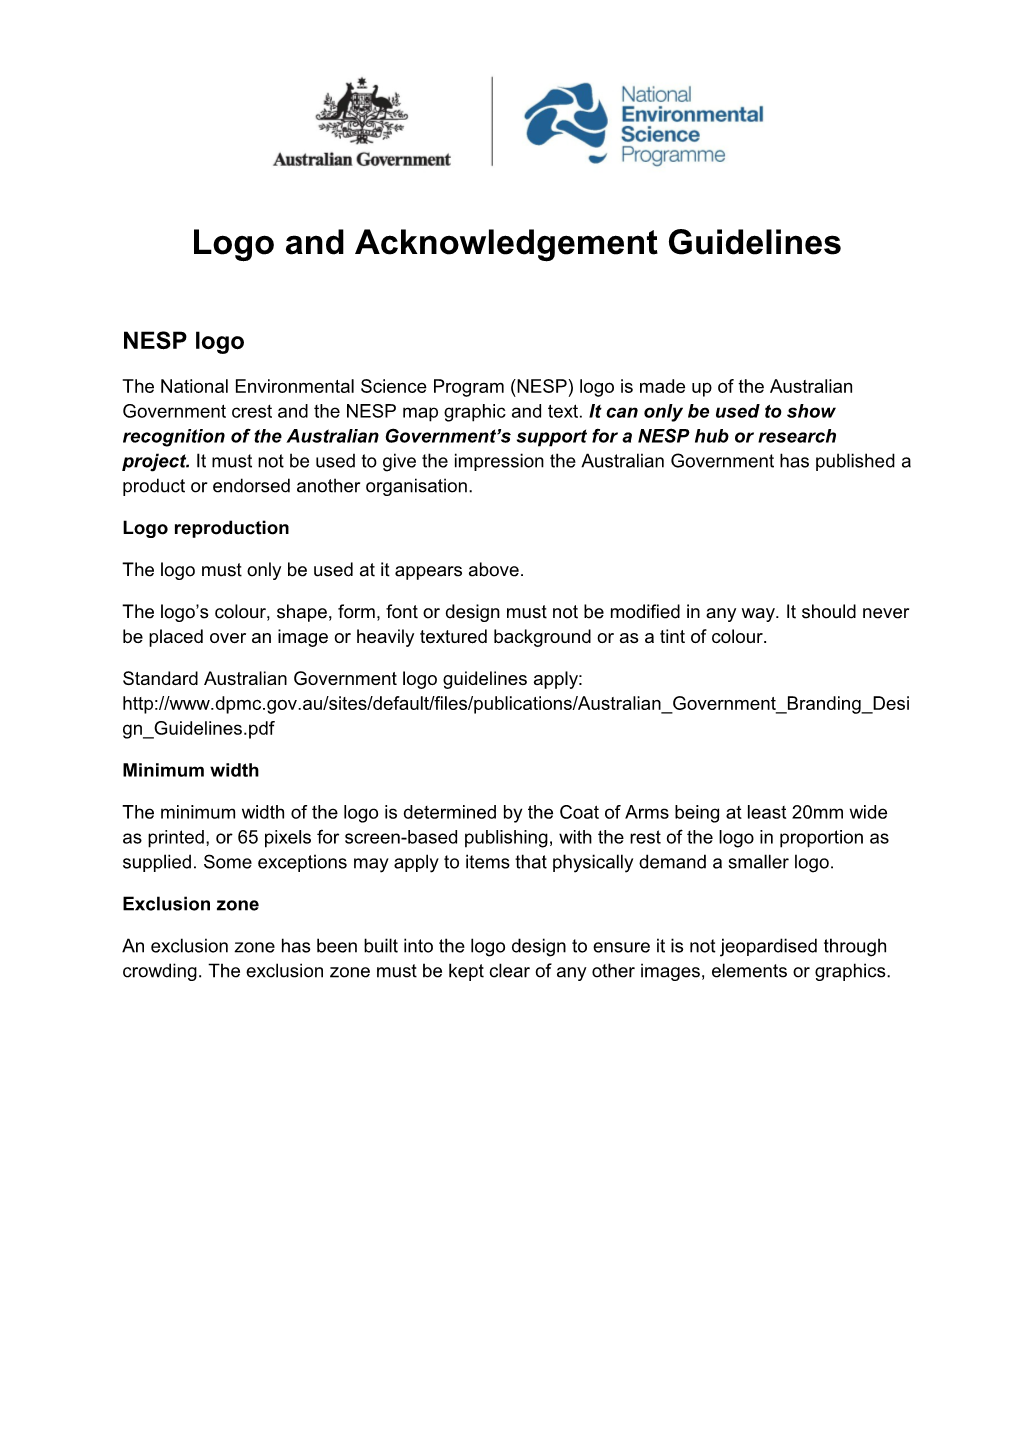 NESP Logo and Acknowledgement Guidelines